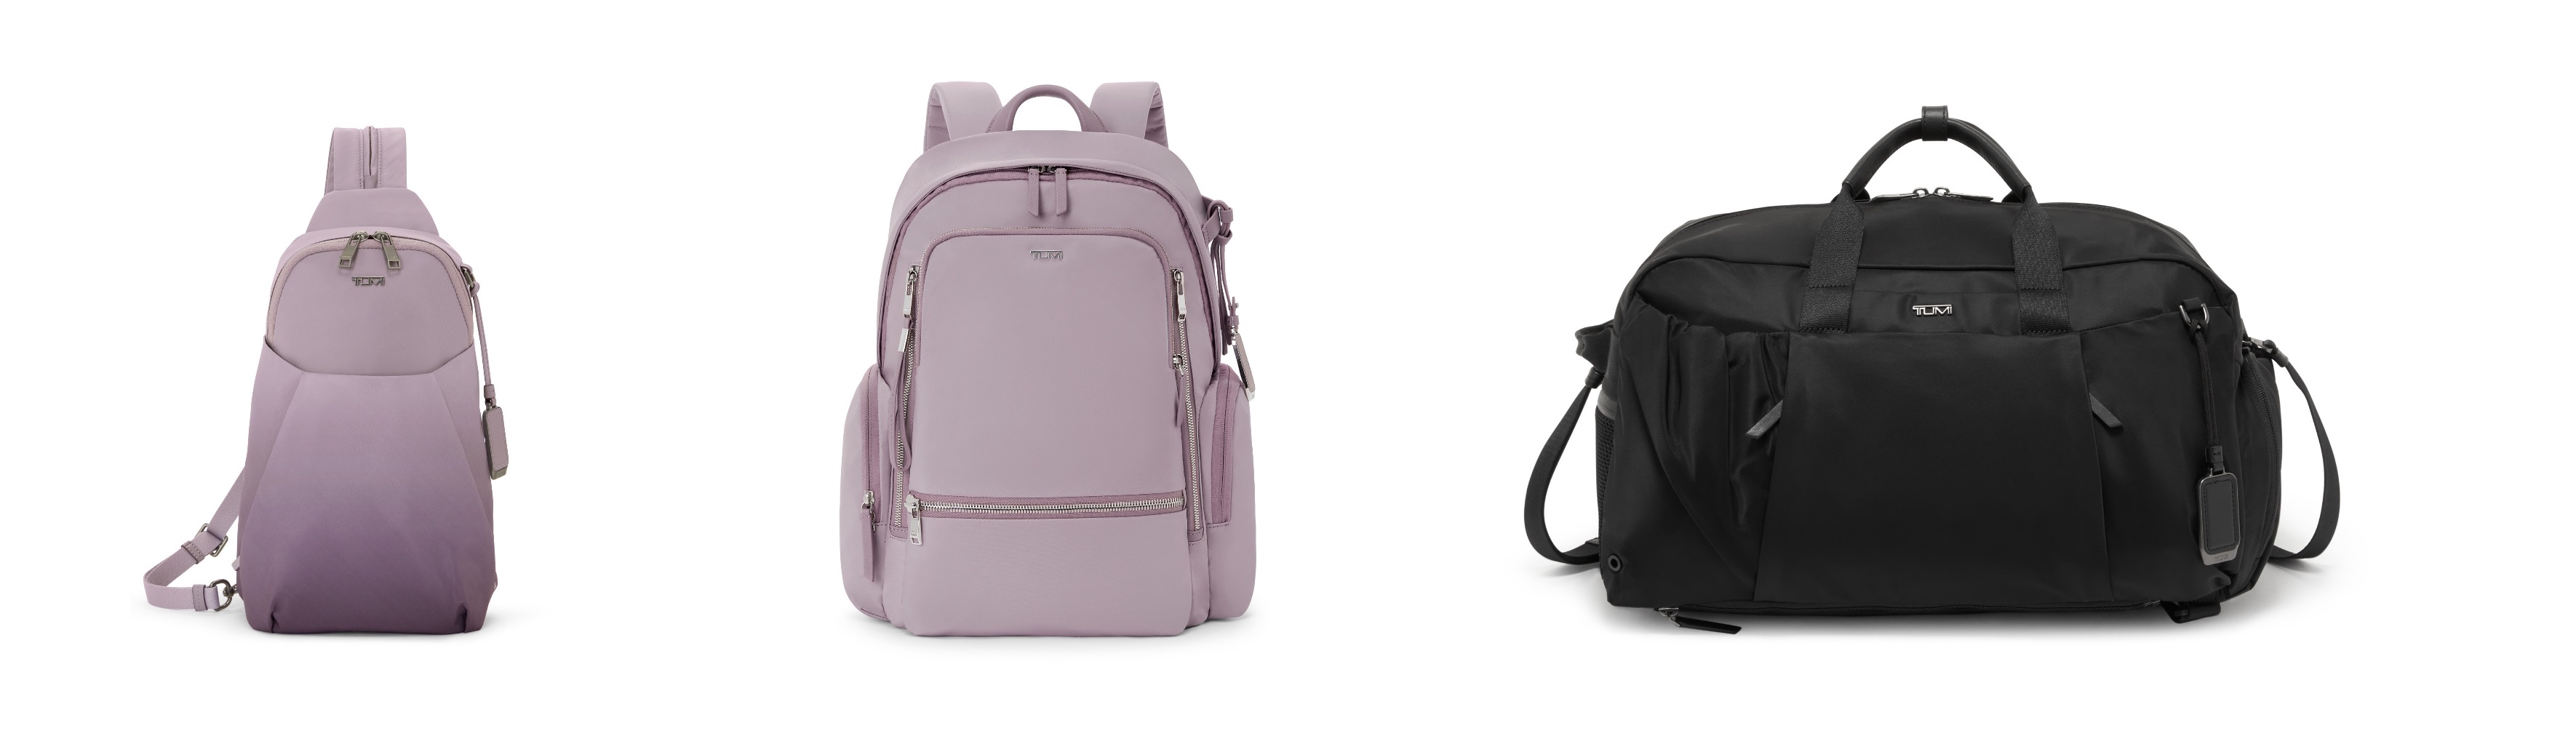 L to R: TUMI Voyageur Kileen Convertible Sling in Lilac Ombre TUMI Voyageur Celina Backpack in Lilac TUMI Voyageur Malta Duffel/Backpack in Black Gunmetal